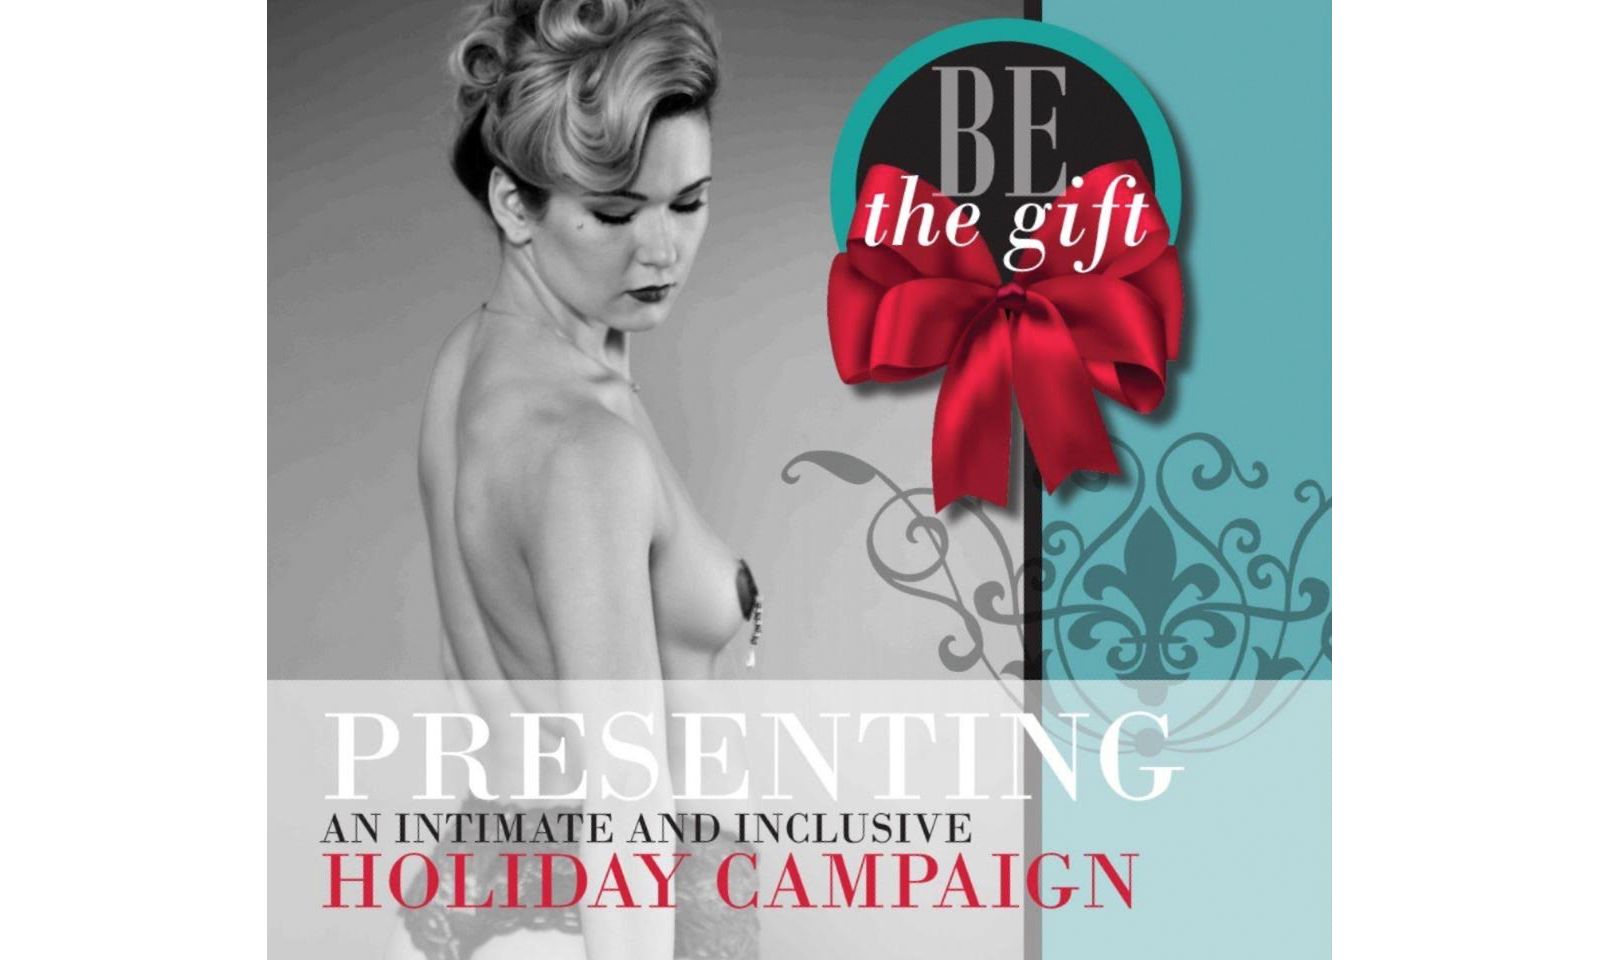 PHS' Be the Gift Holiday Campaign Extended for Bijoux de Nip Accessories